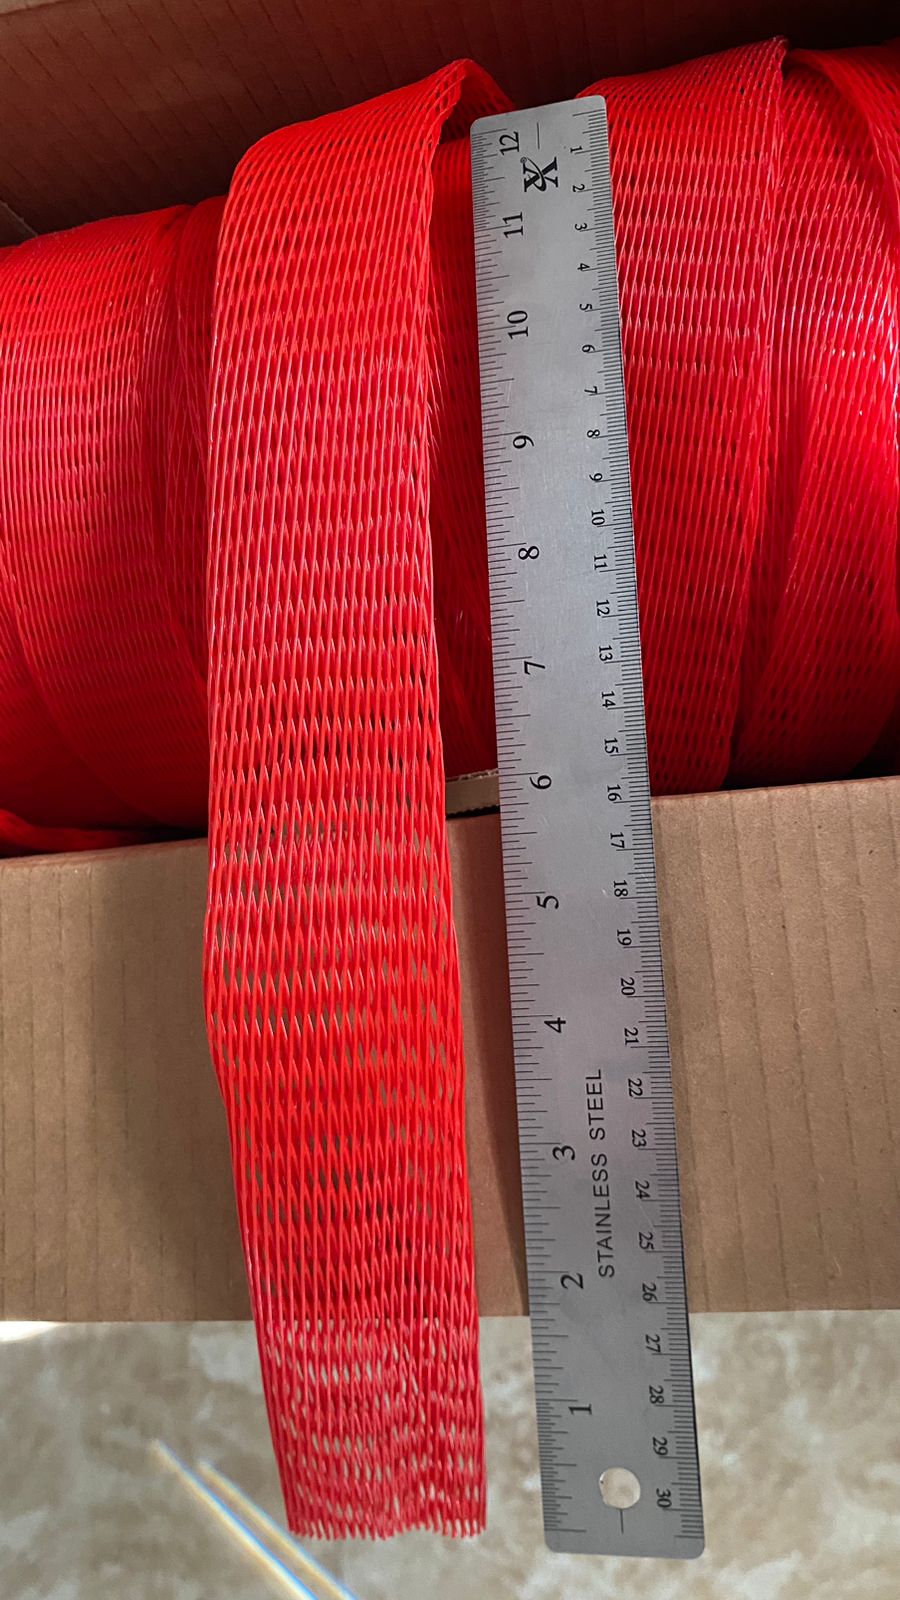 Protective Sleeve Net 50-100MM 50MTR PK (red) roll